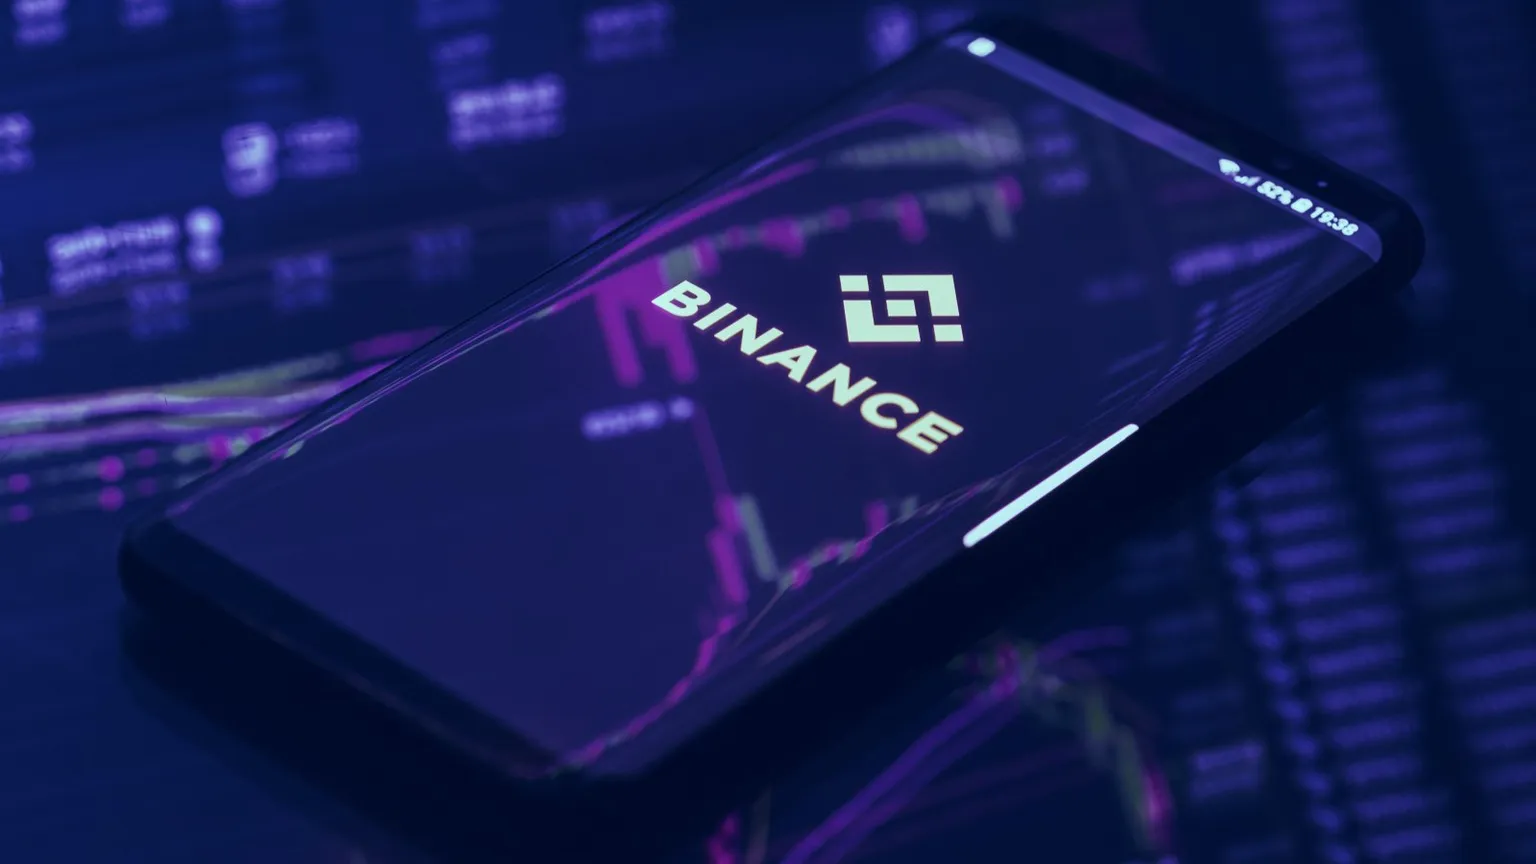 Binance is one of the largest crypto exchanges in the world. Image: Shutterstock